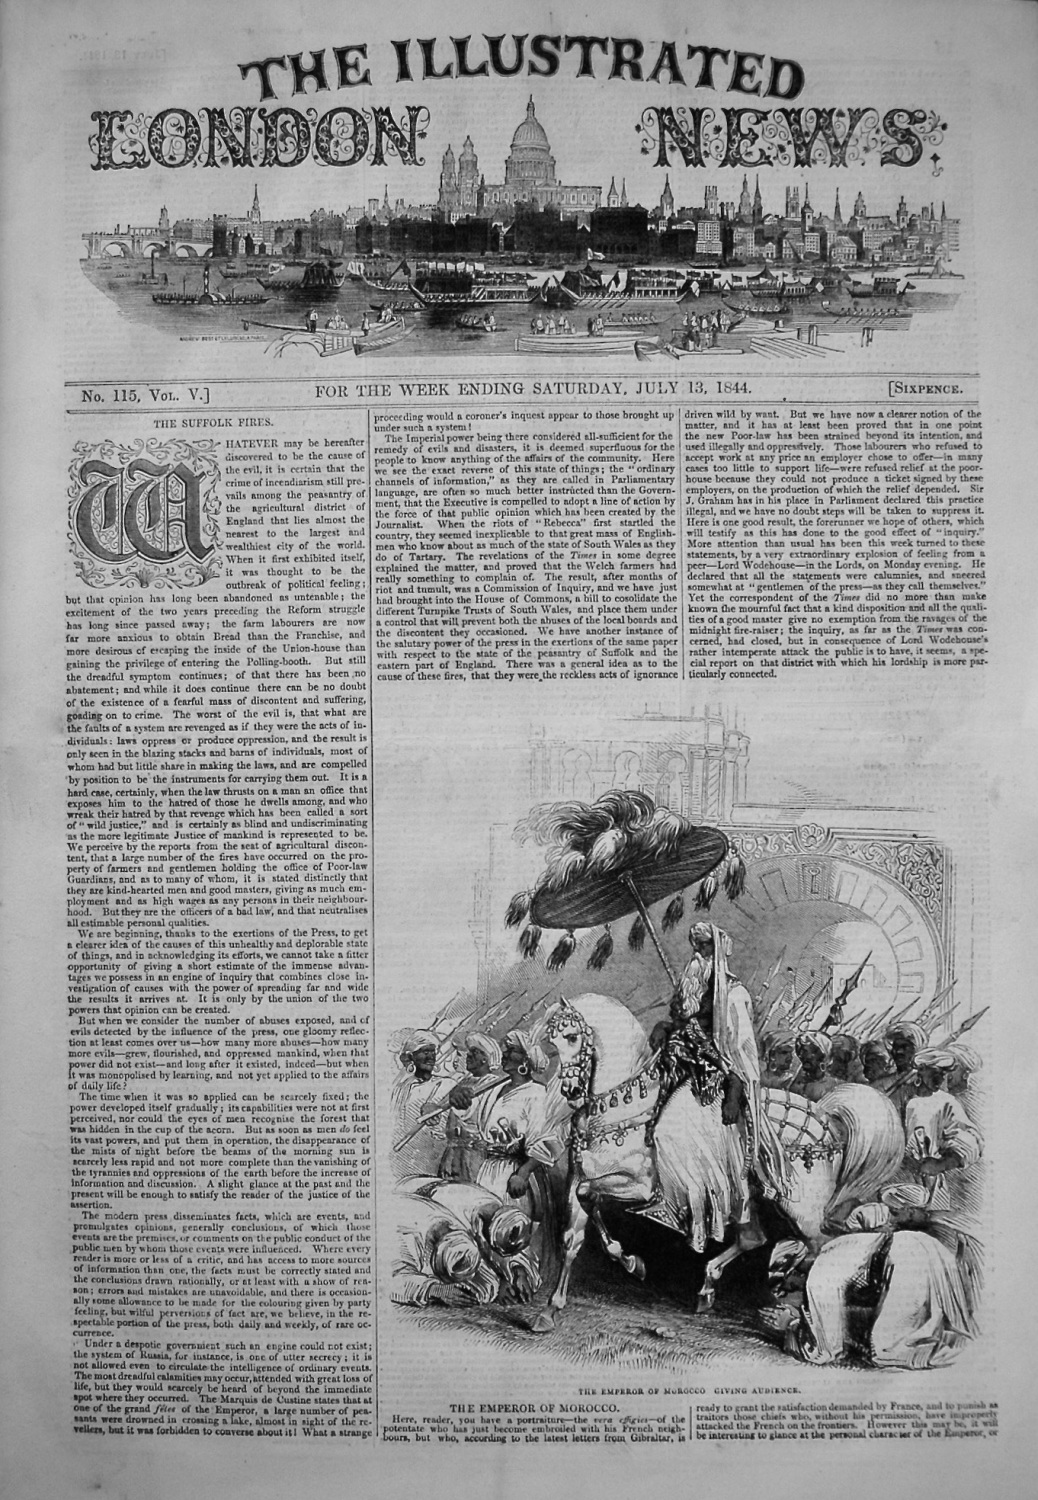 Illustrated London News. July 13th, 1844.